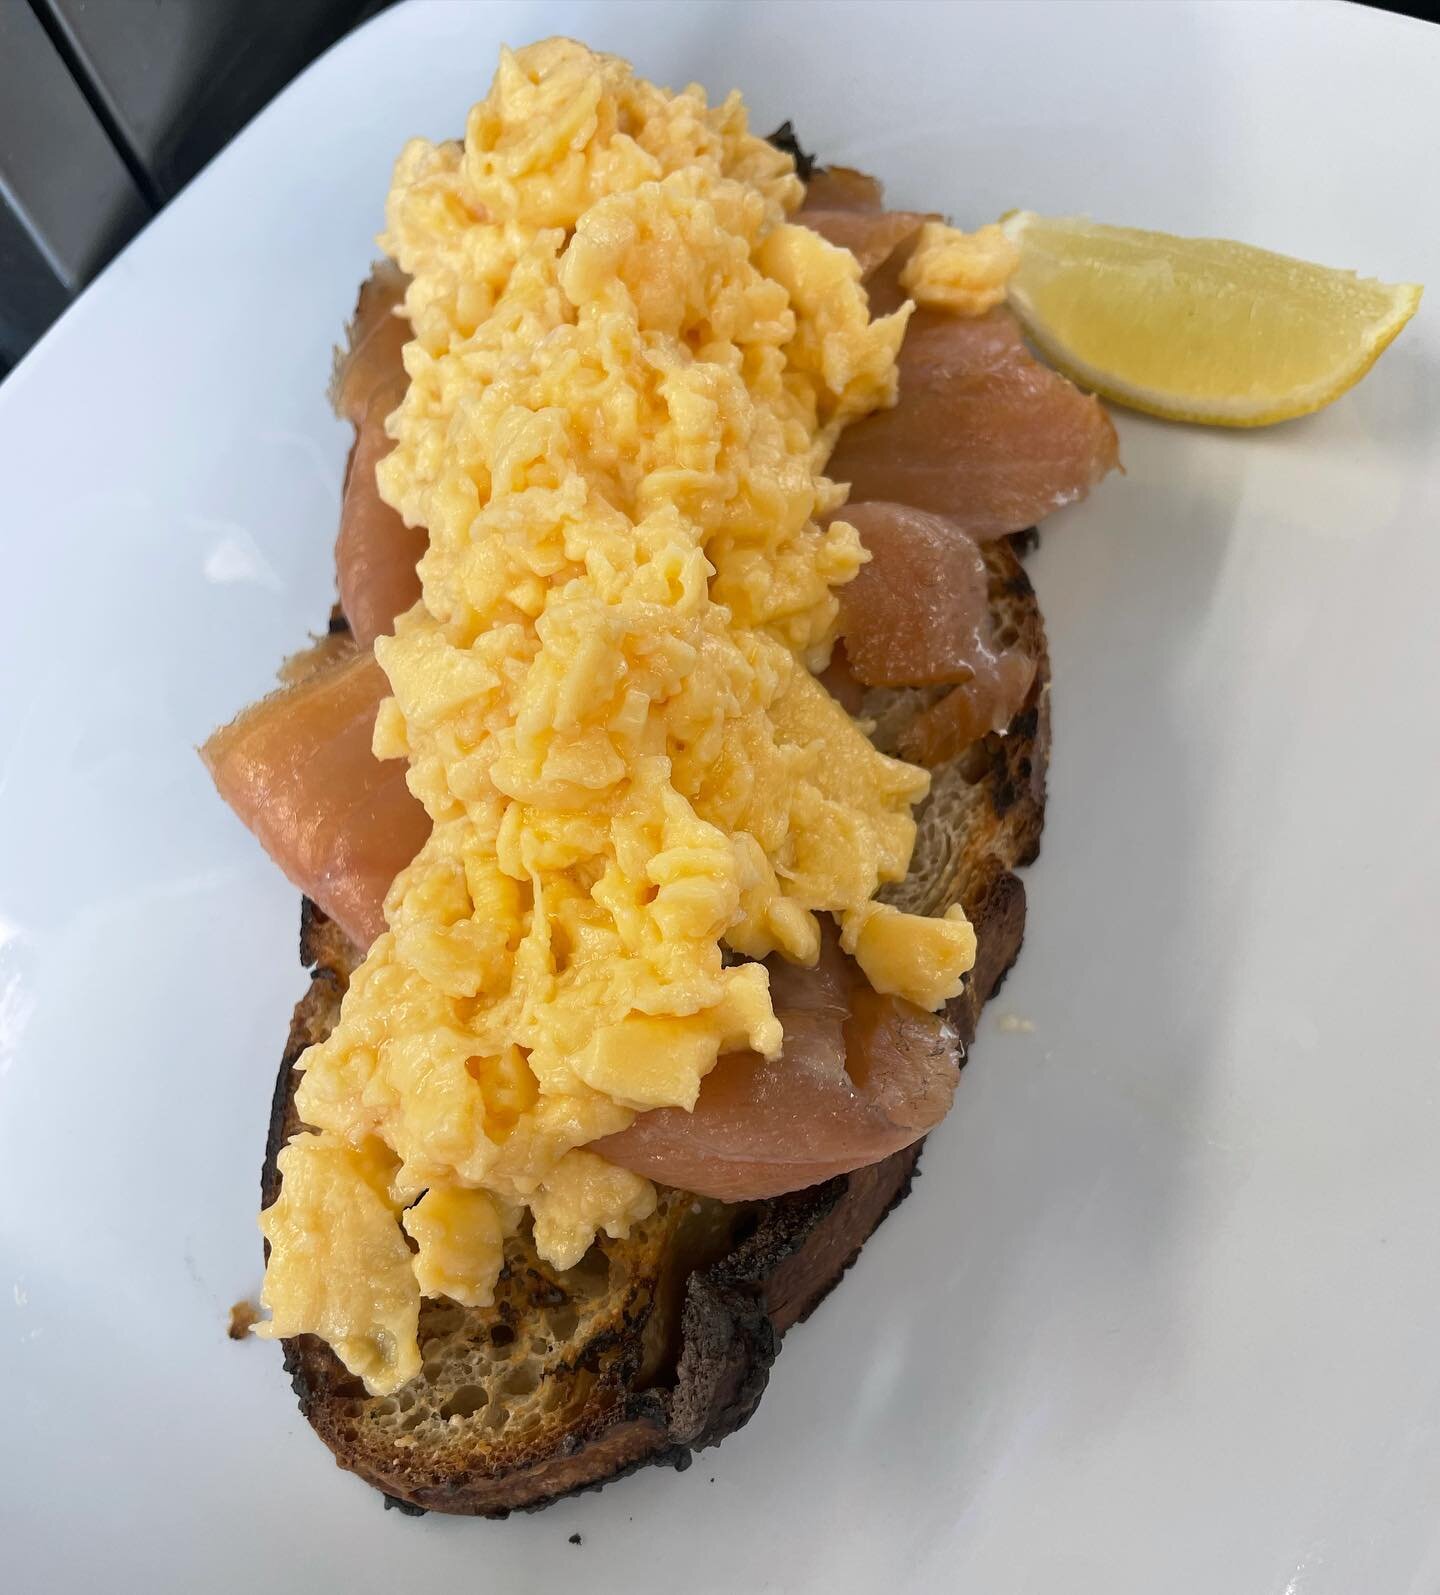 Smoked and scrambled on sourdough! 

@ry_chef 

#smokedandscrambled #eggs #foodie #fish #restaurant #goodmorning #groundedbrothers